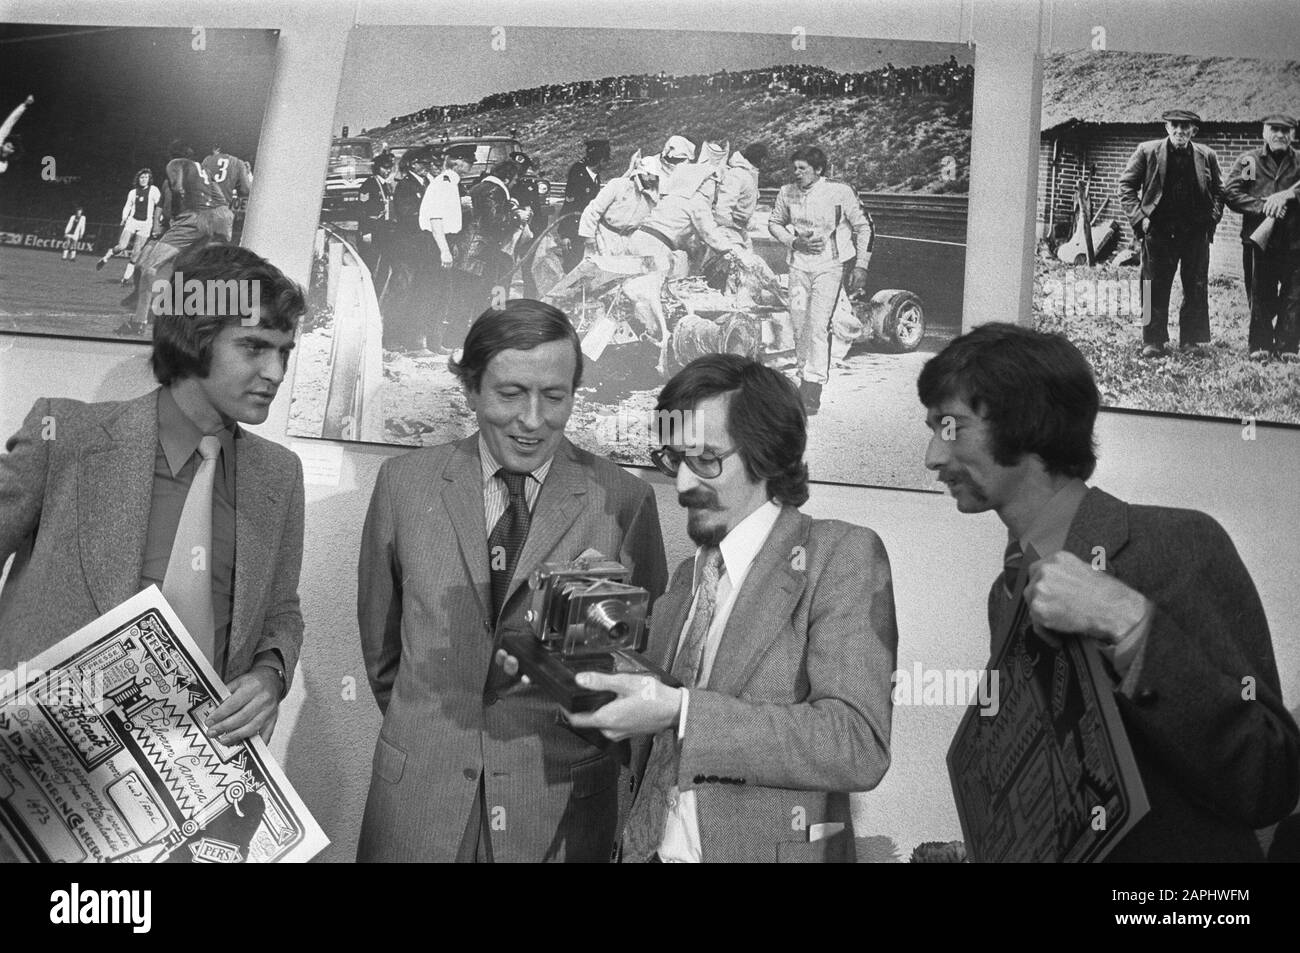 Prince Claus presents the Silver Camera to Rob Mieremet for the best Dutch press photo of 1973 Description: The prince in conversation with the winner and other attendees Date: 22 November 1973 Location: Amsterdam, North Holland Keywords: photos, photographers, photo contests, press photography, princes Personal name: Claus, prince, Mieremet, Rob Stock Photo